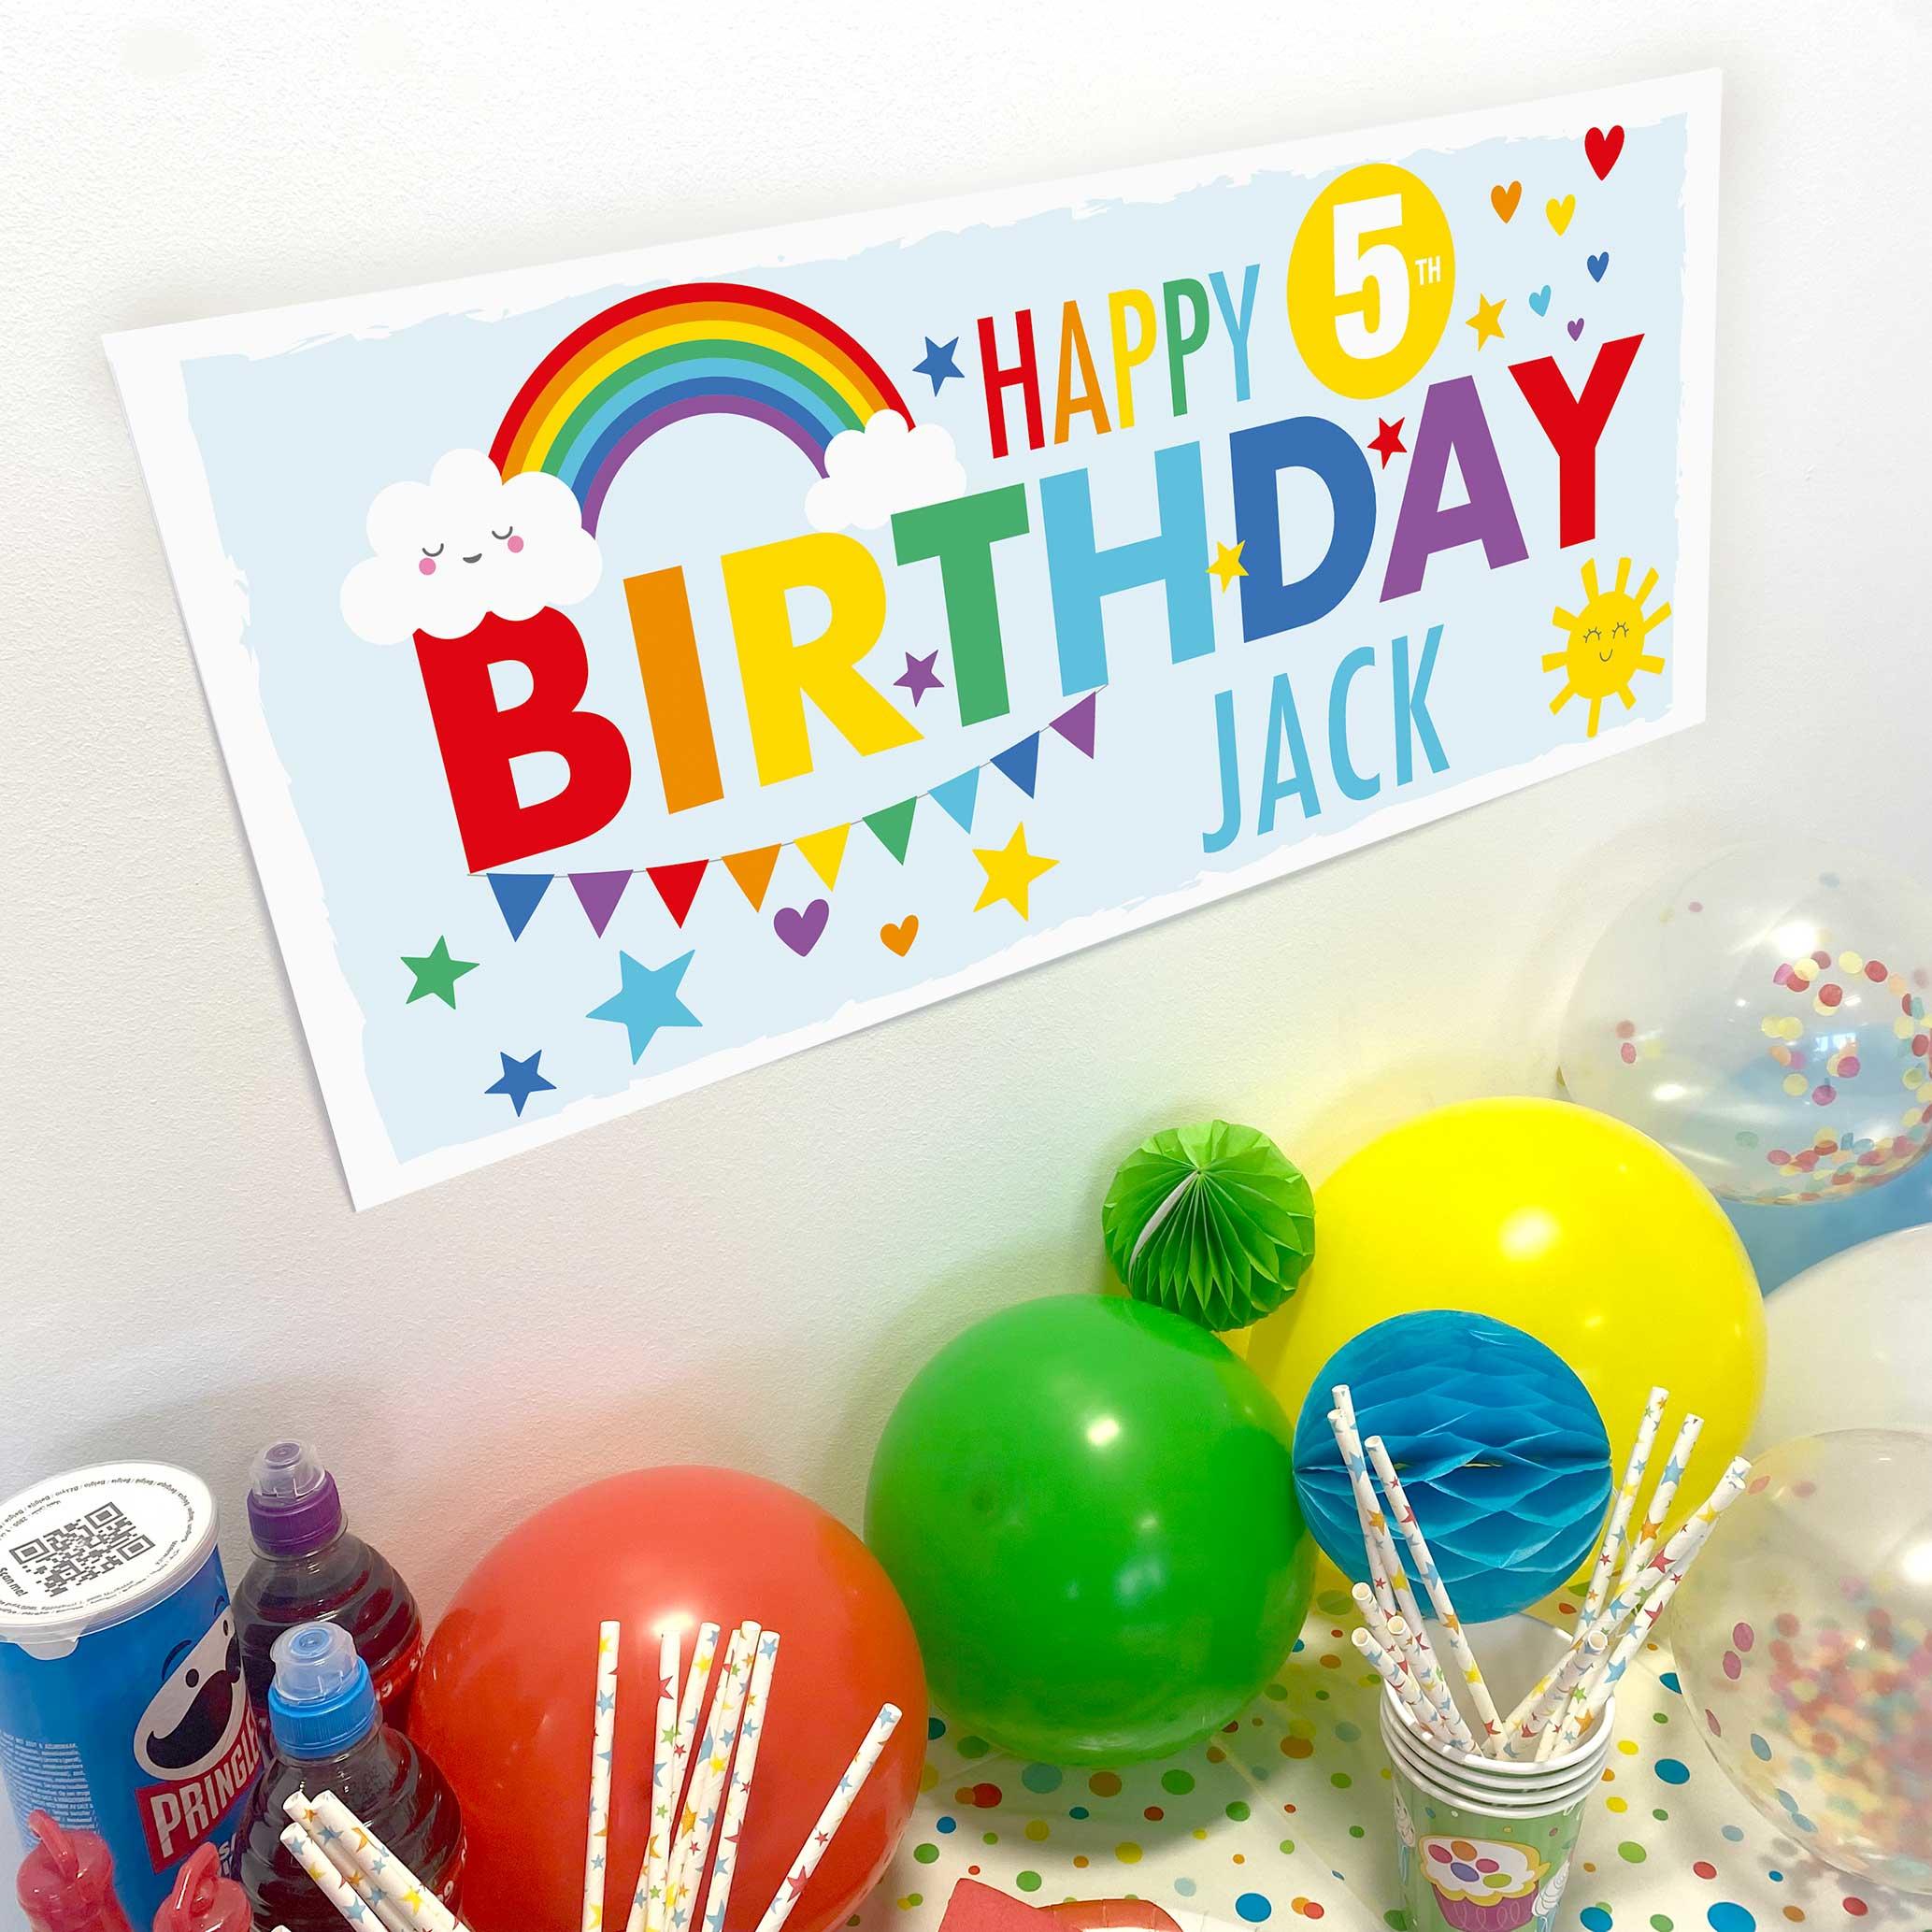 frame my name, rainbow birthday party banners, kids party decor